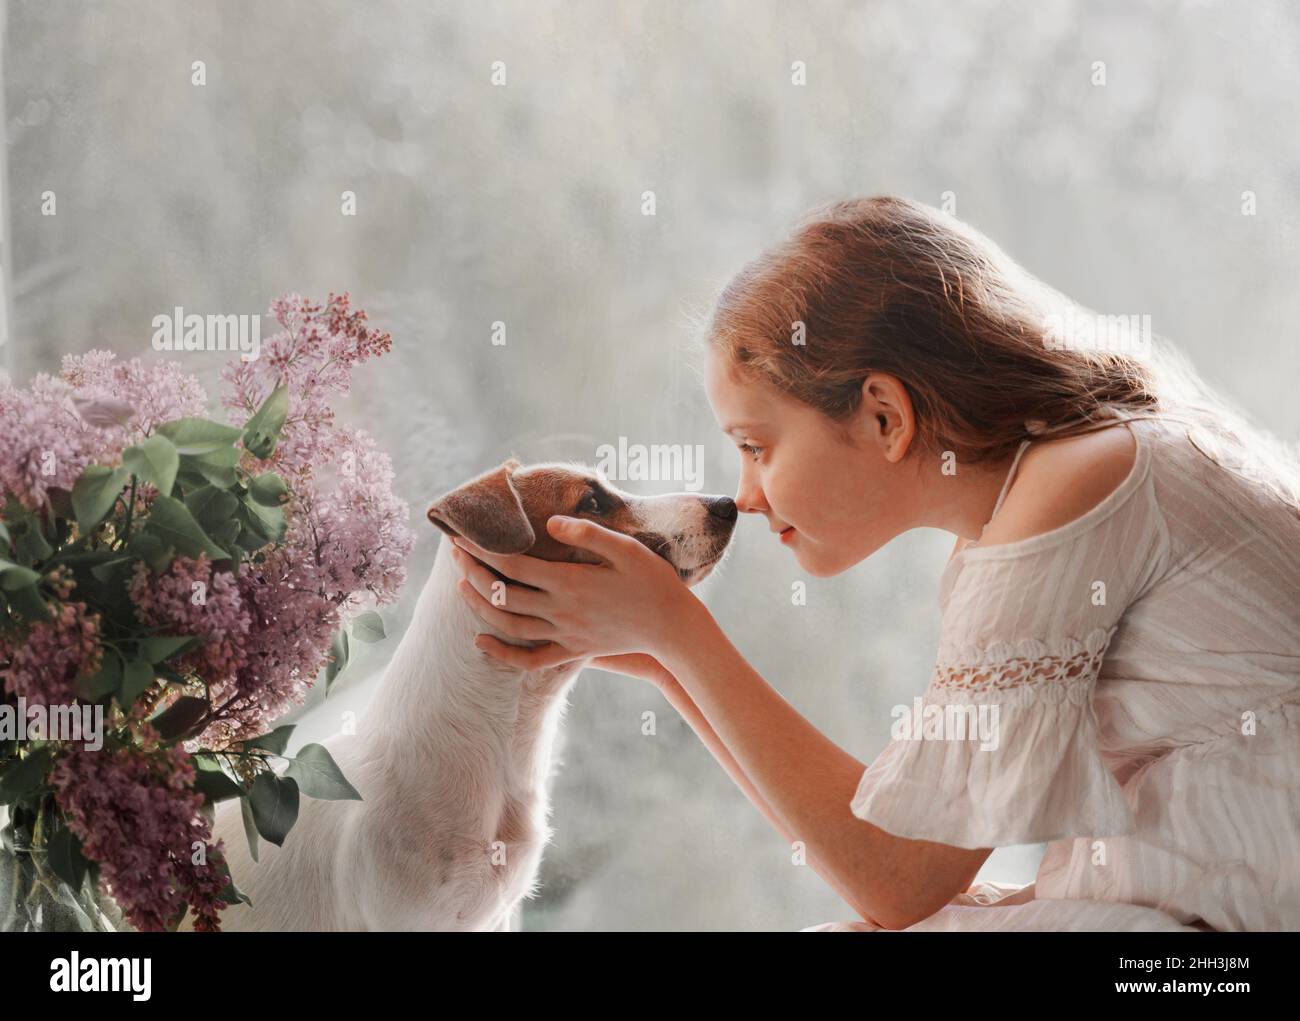 Cute little girl looks into the eyes of a dog. Two friends sitting on the window. Friendship, care, happy childhood concept. Stock Photo